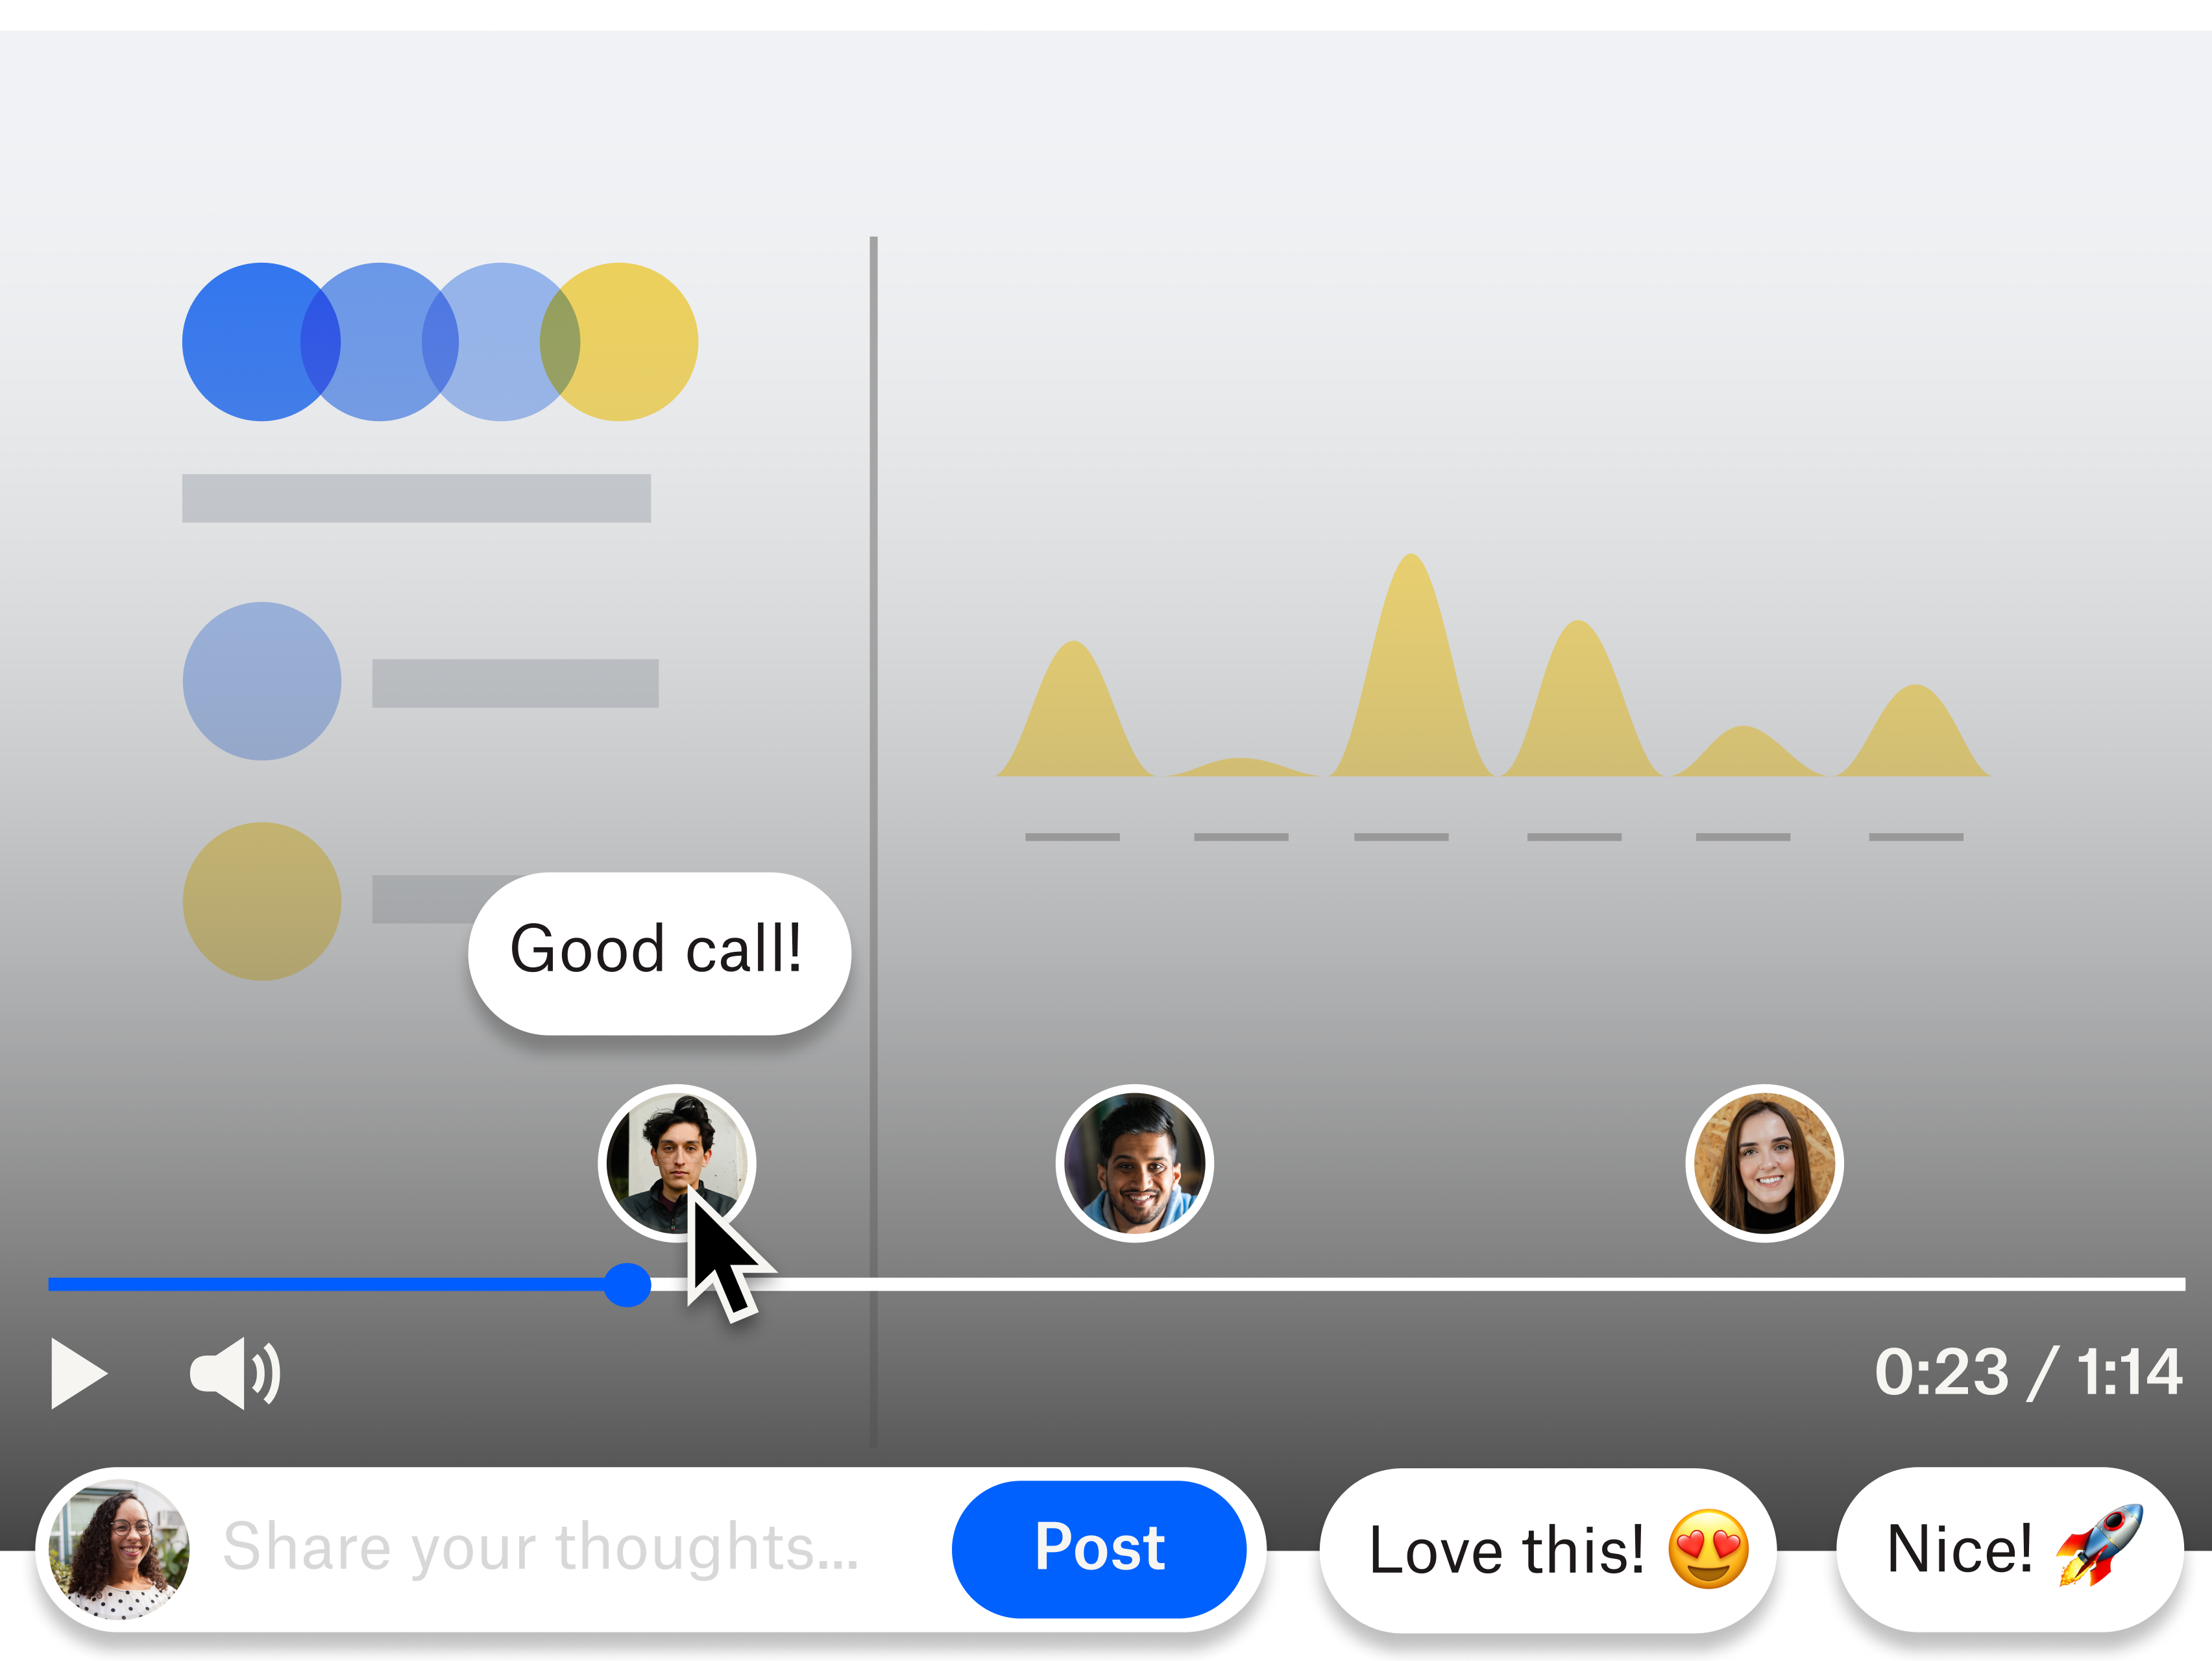 A visual representation of the video playback experience in Dropbox Capture, with timed comments and reactions from Dropbox users.